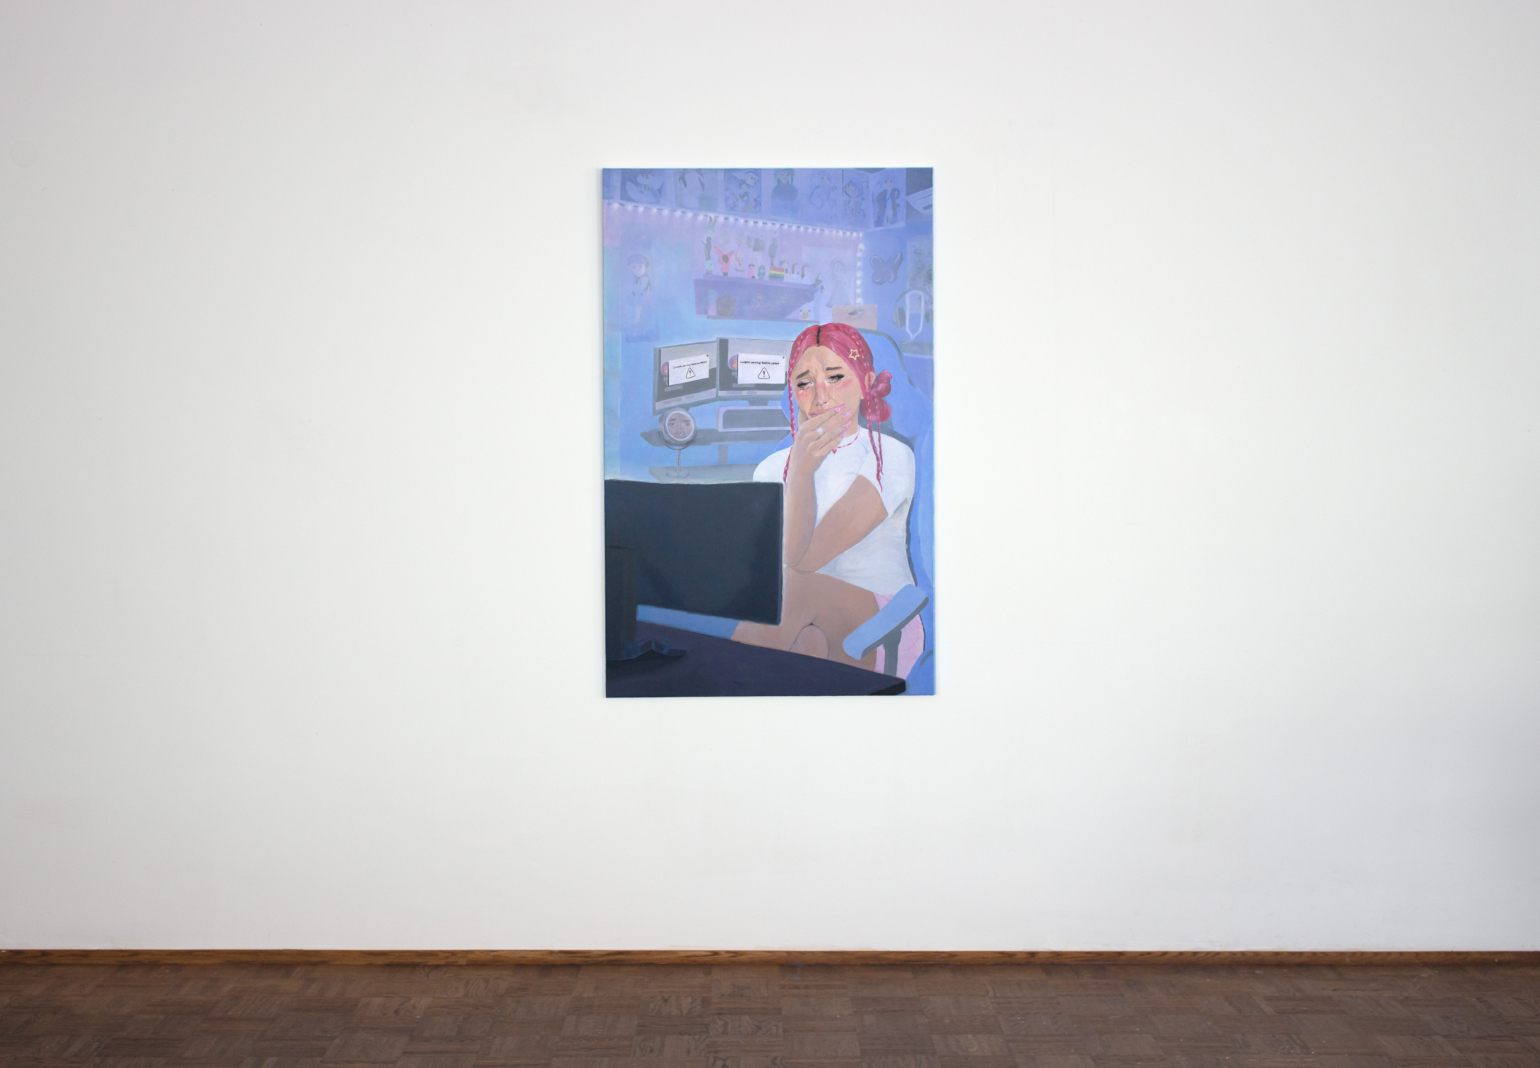 Frances Hannigan, THE FOLLOWING CONTENT MAY BE UPSETTING, 2023, acrylic on canvas, 1300 x 800mm